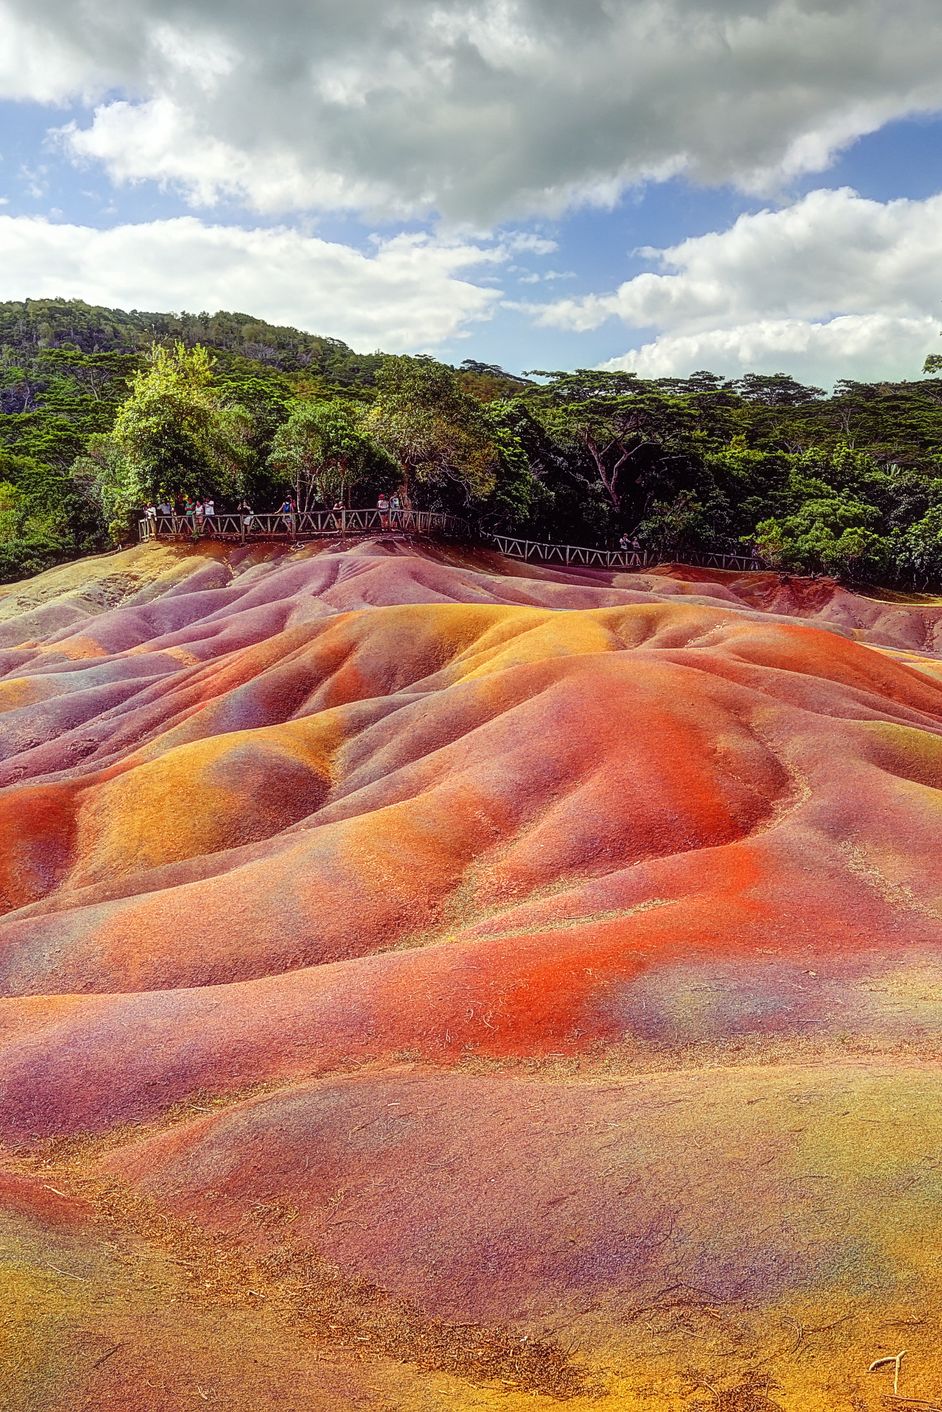 the geological formation "Seven Coloured Earths"